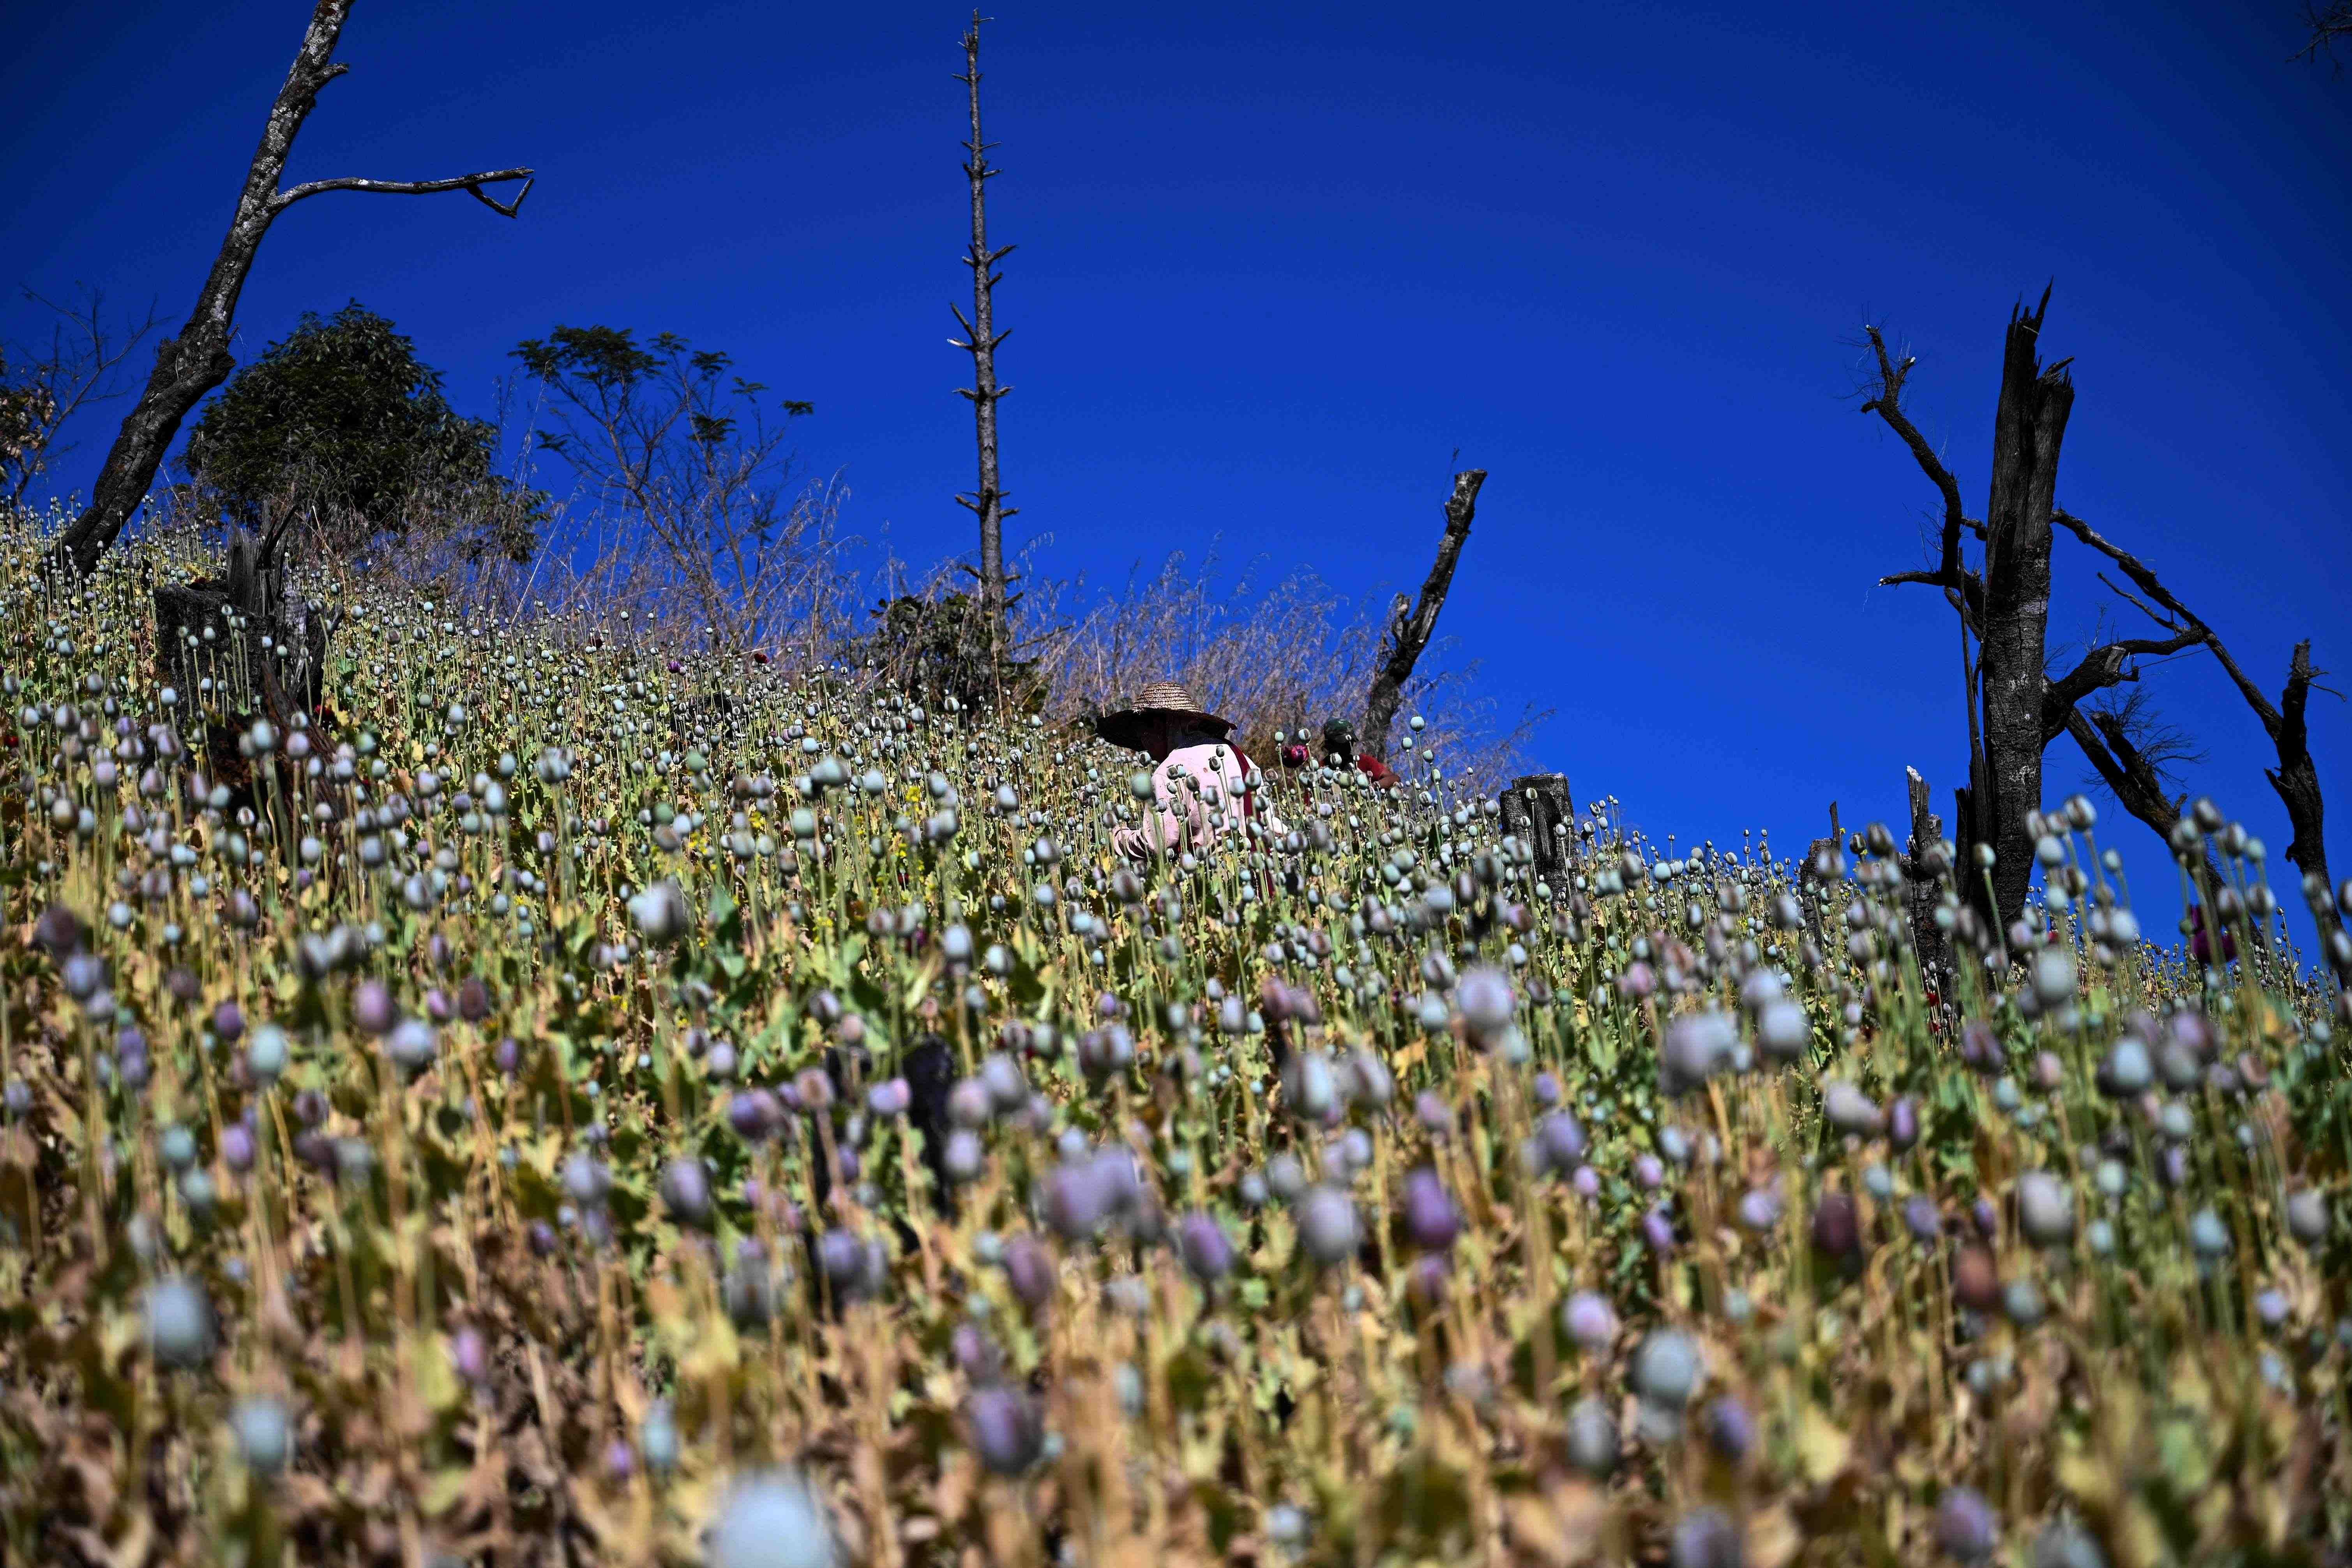 Fields of purple opium poppy stretch across the pastures and peaks of mountainous eastern Myanmar. Credit: AFP Photo